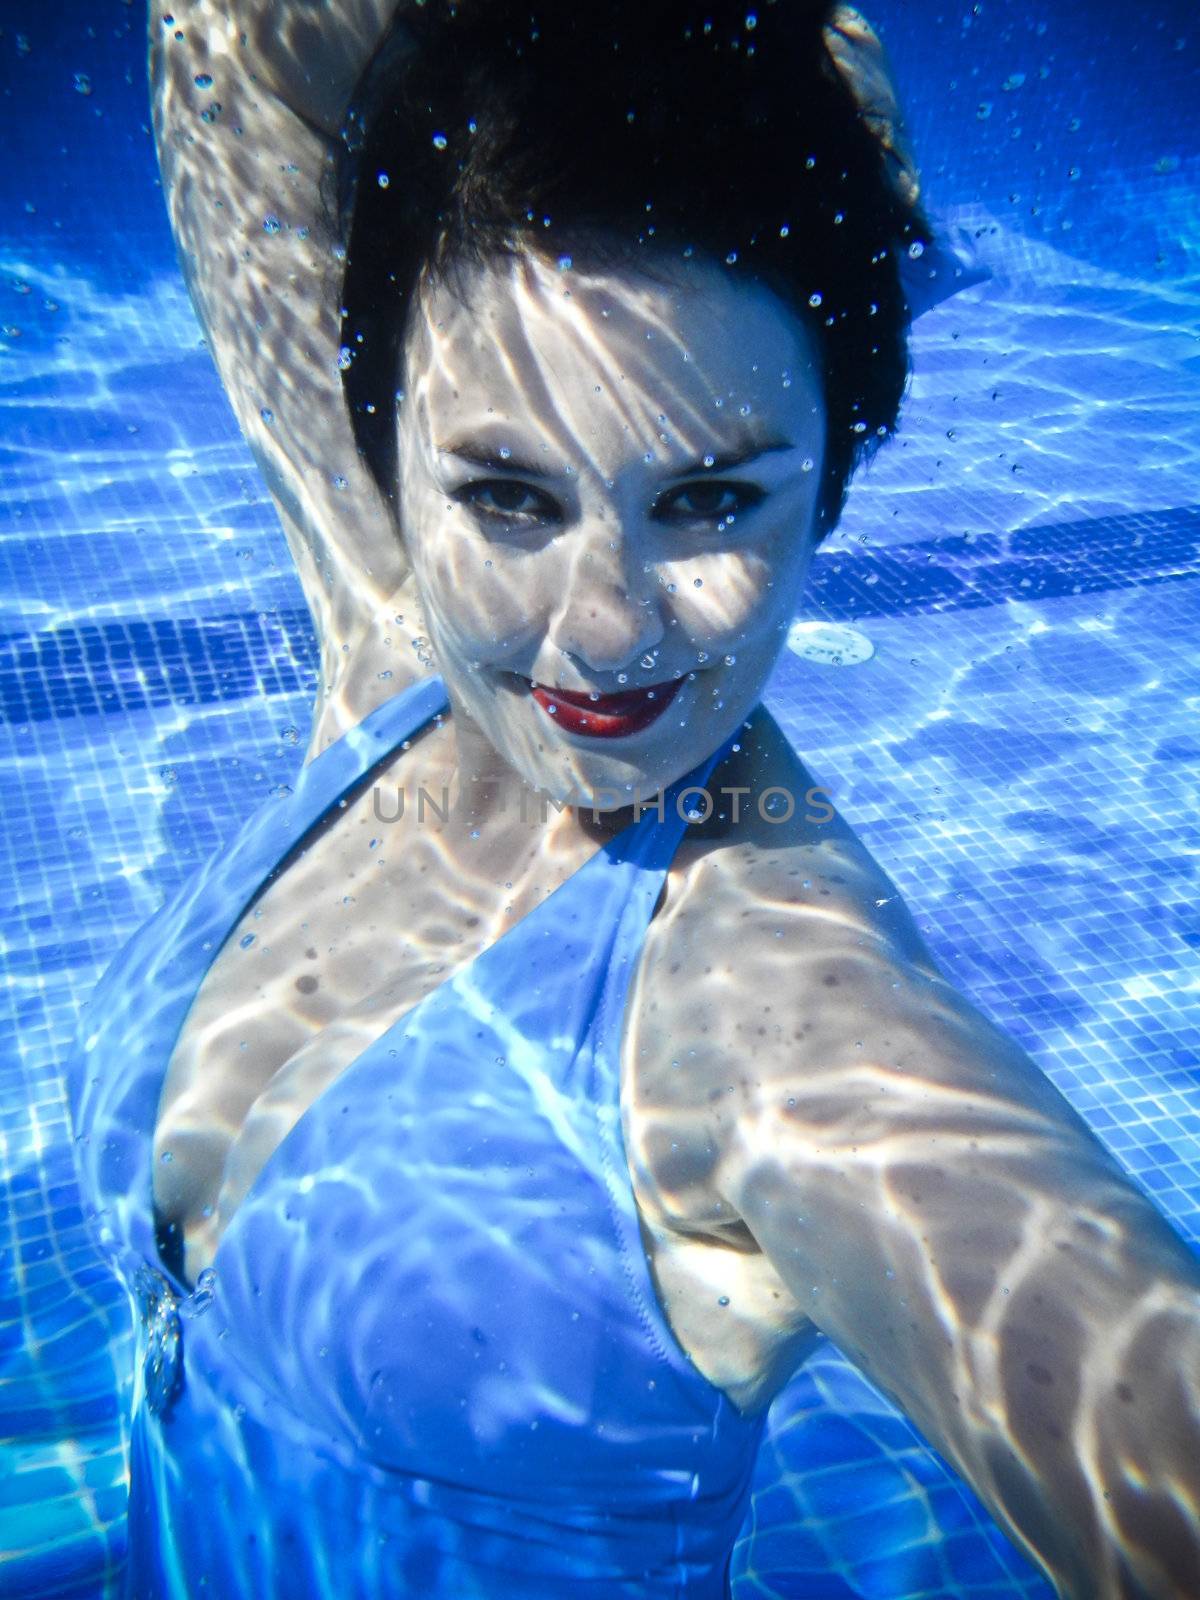 Vintage girl swimming and smiling underwater in a swimming pool